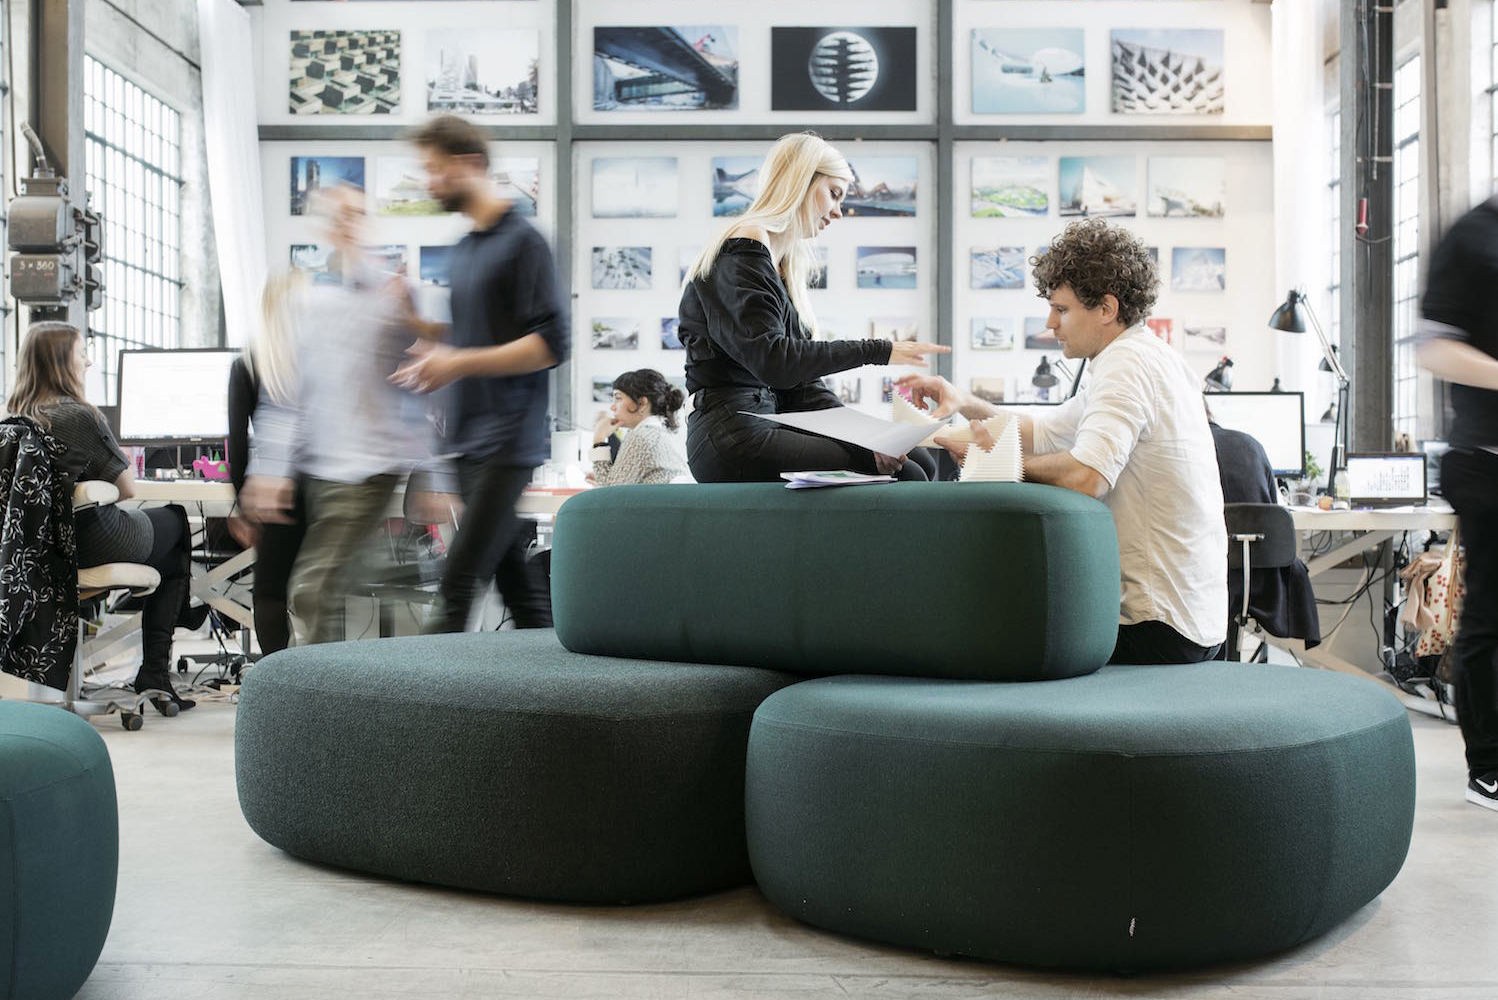 Kilo Design launched Kilo Islands a collection of modular benches that combine for a variety of collaborative configurations